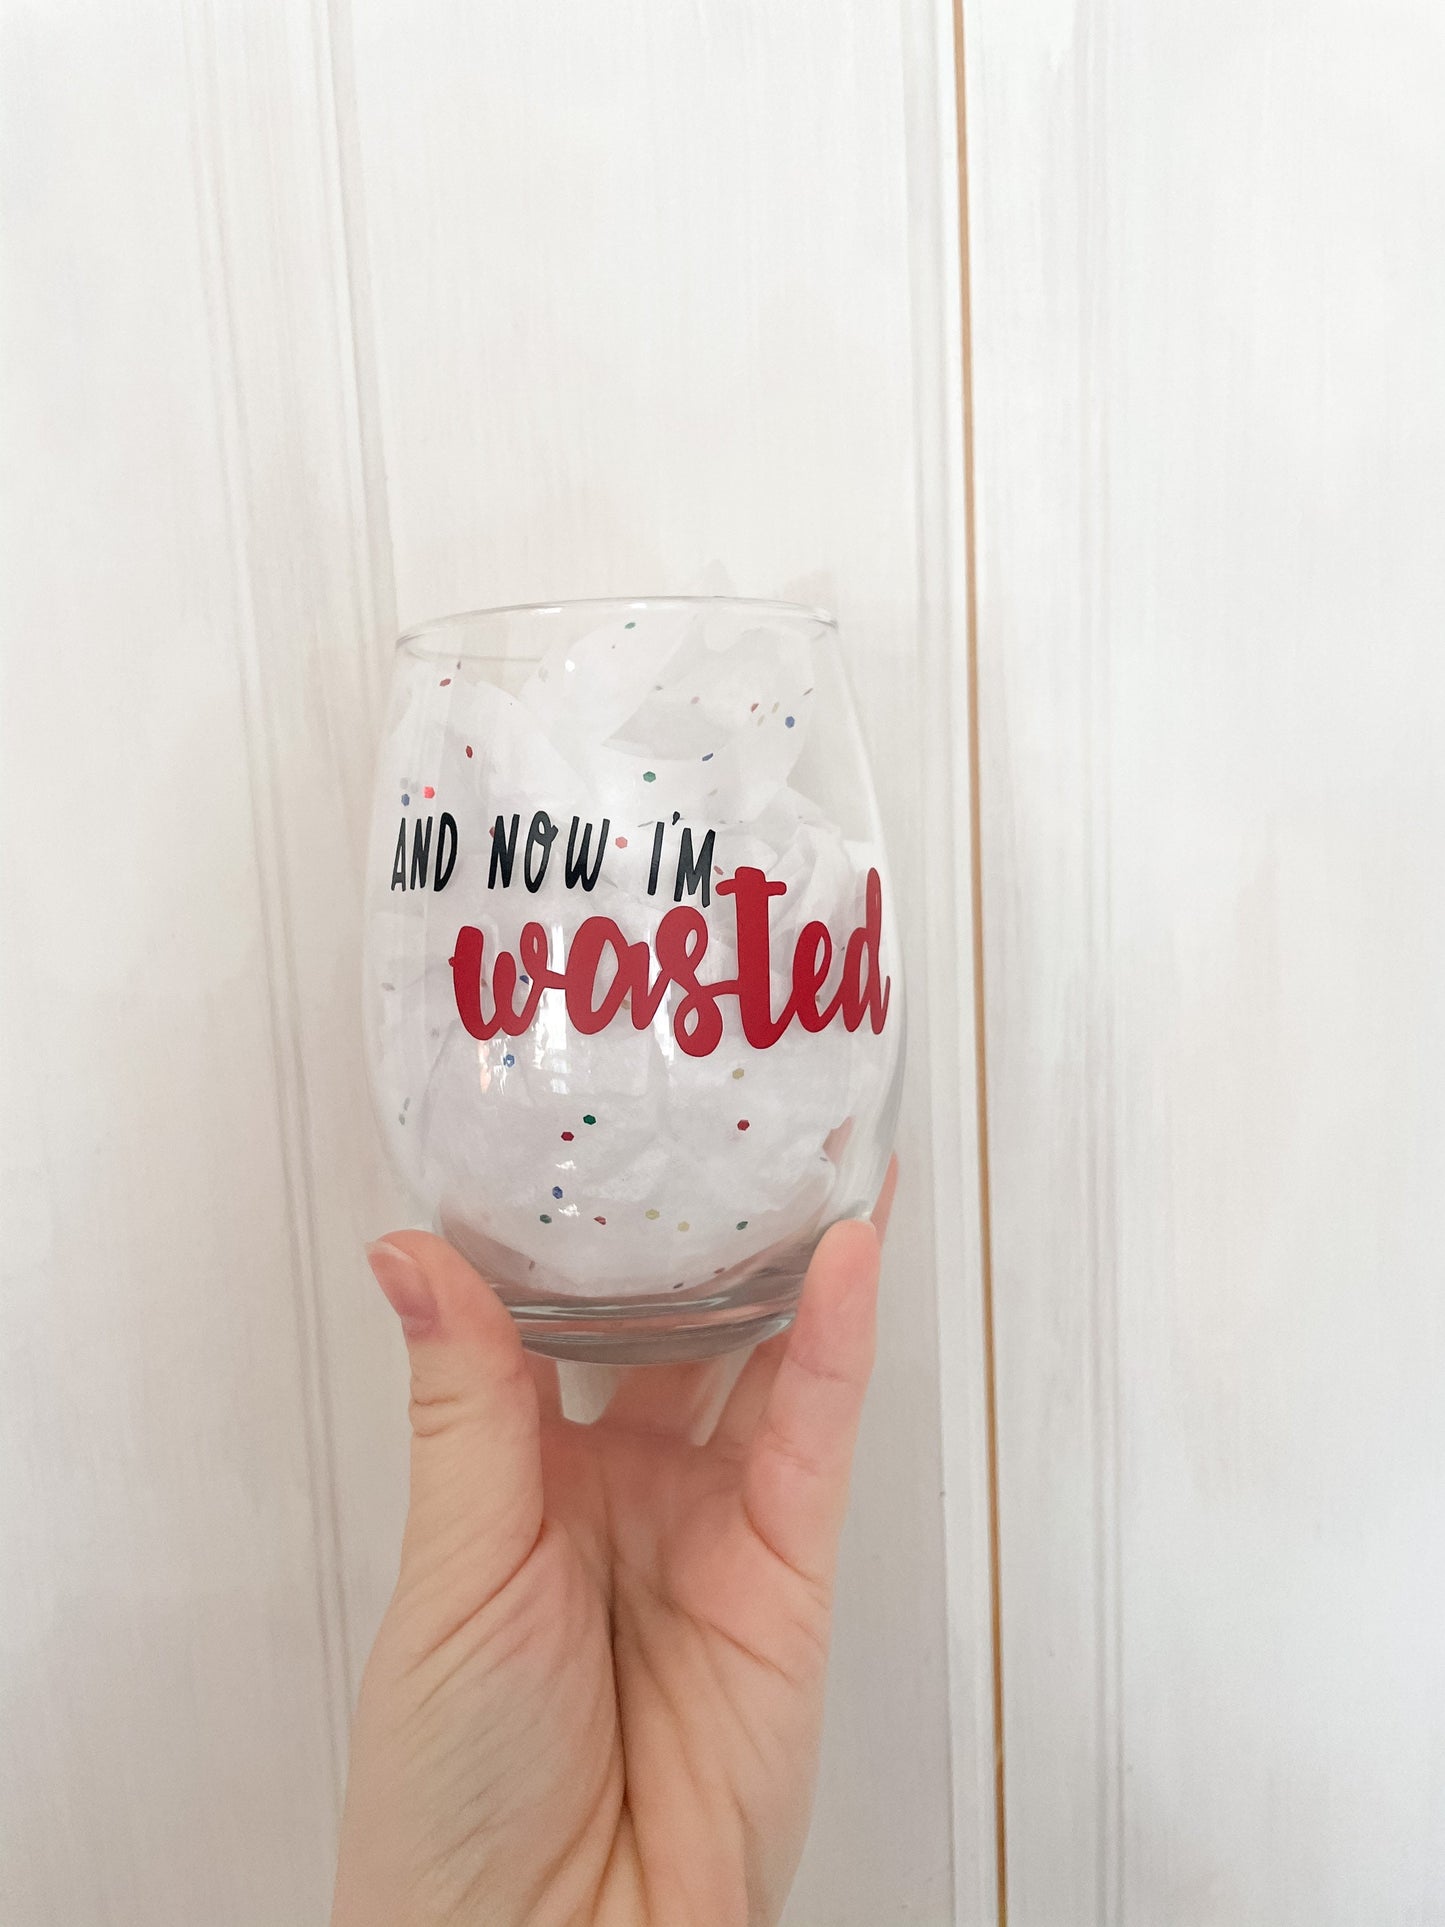 Medicine - And Now I'm Wasted || Wine Glass || 3 colors Available!